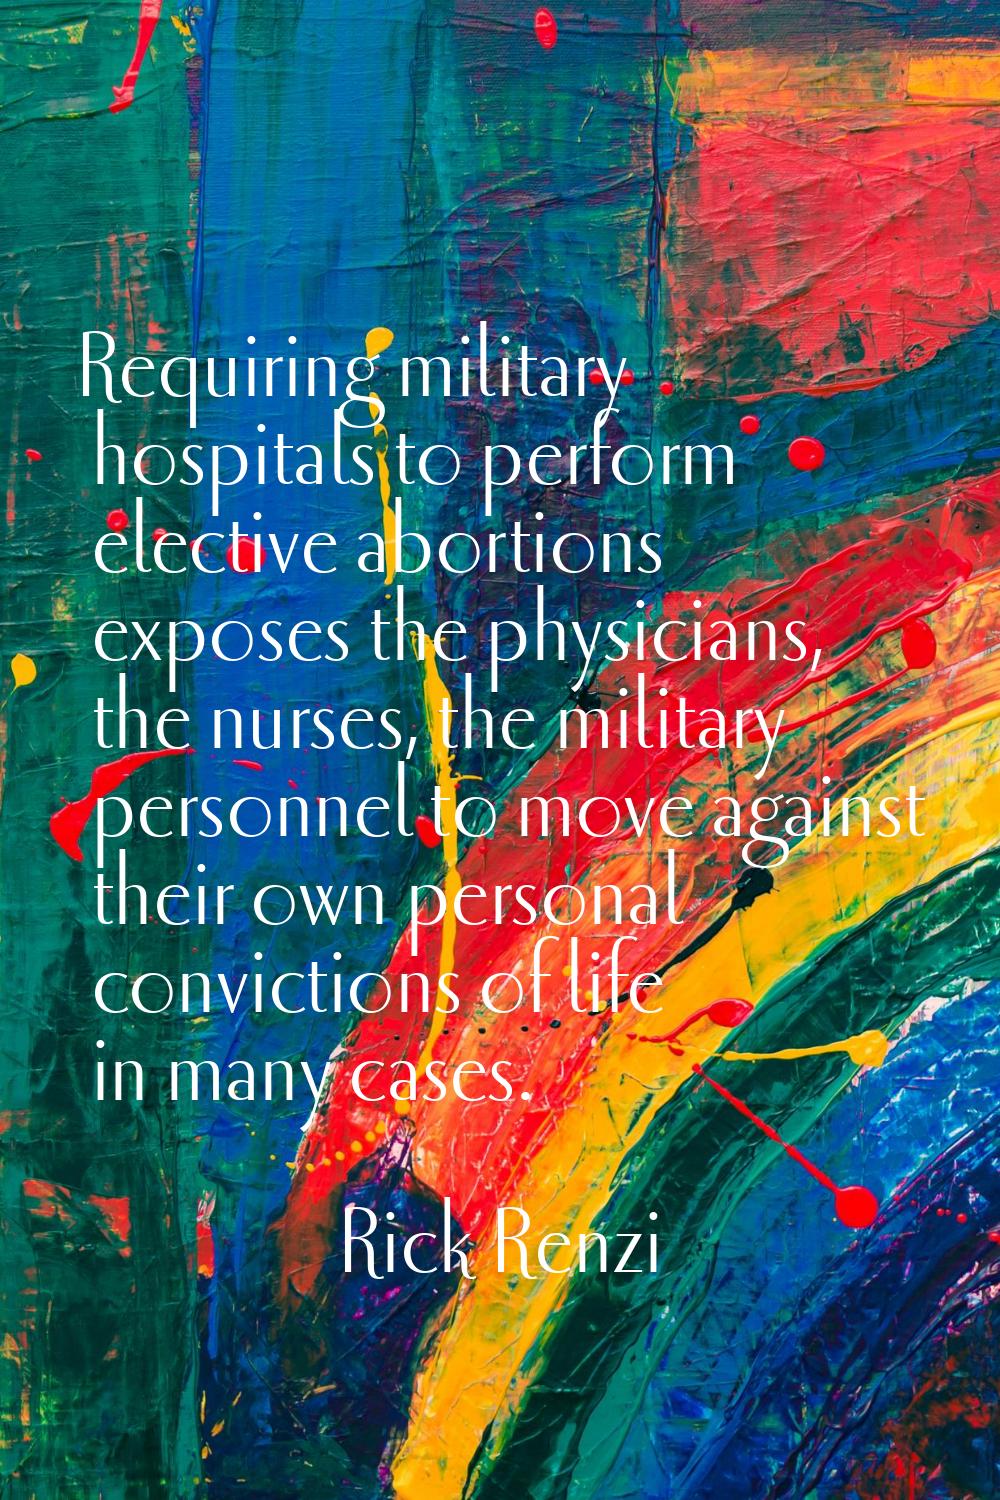 Requiring military hospitals to perform elective abortions exposes the physicians, the nurses, the 